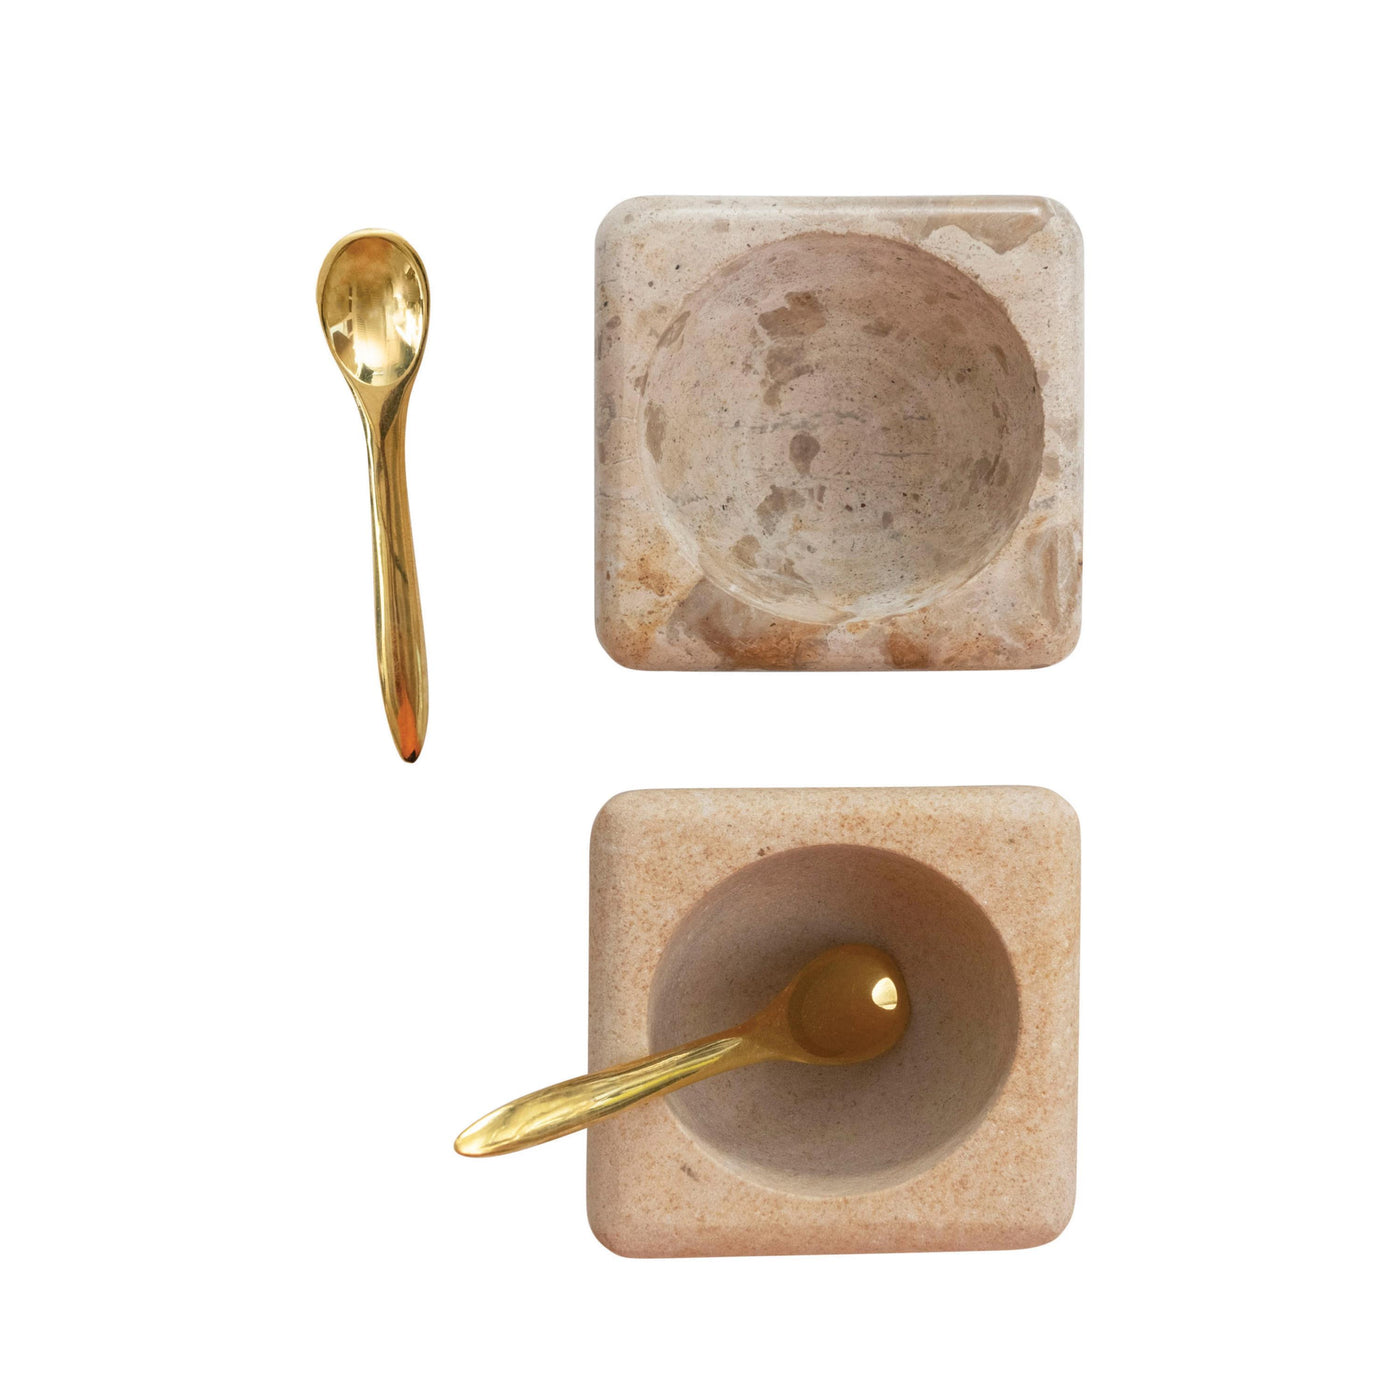 Set of 2 Marble and Sandstone Pinch Pots with Brass Spoon